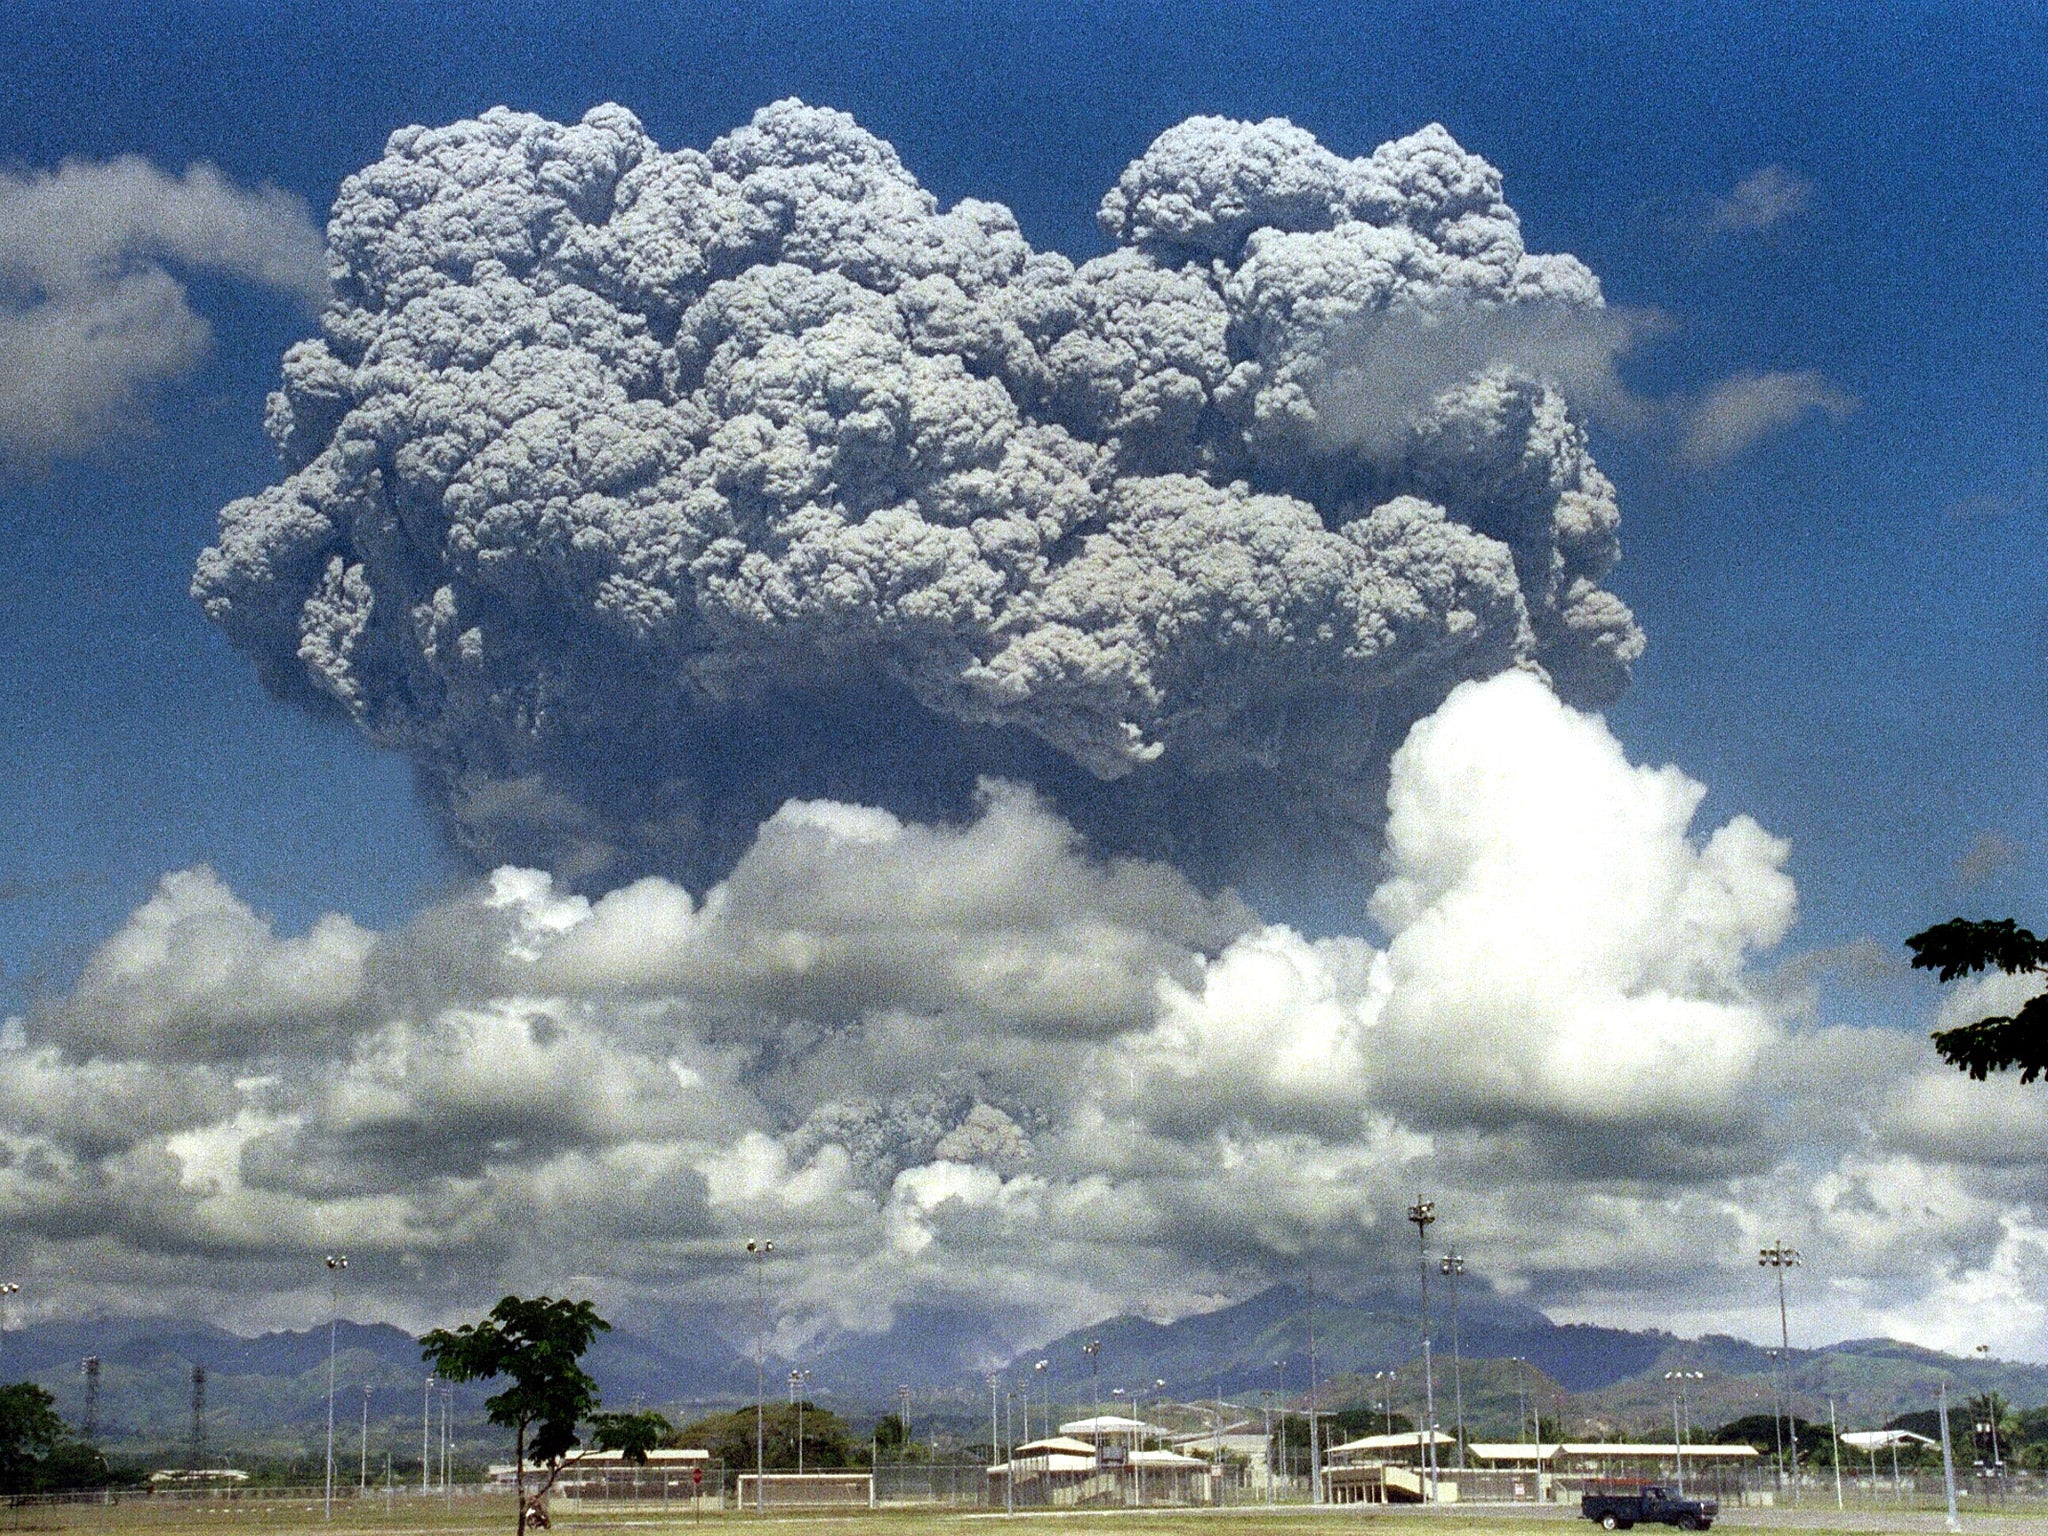 A giant cloud of volcanic debris rises some 20km above Mount Pinatubo in the Philippines in June 1991